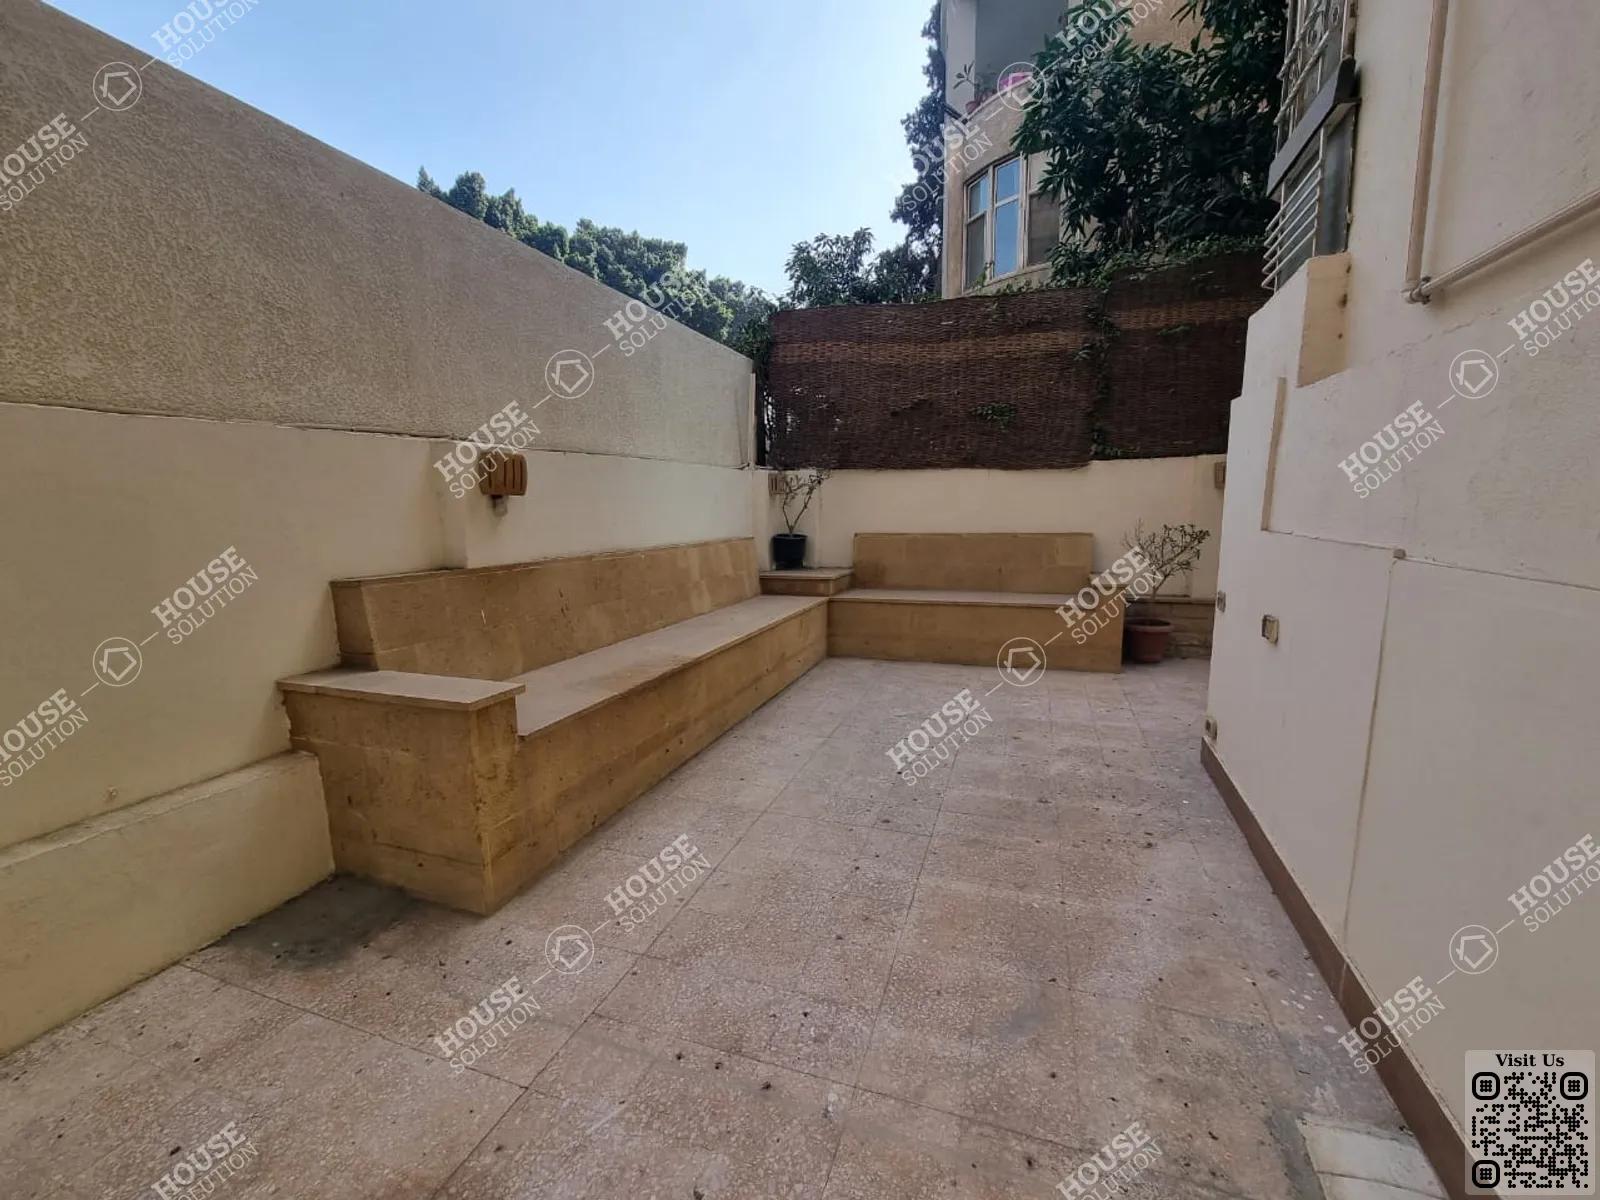 TERRACE  @ Office spaces For Rent In Maadi Maadi Sarayat Area: 185 m² consists of 3 Bedrooms 2 Bathrooms Semi furnished 5 stars #5793-2